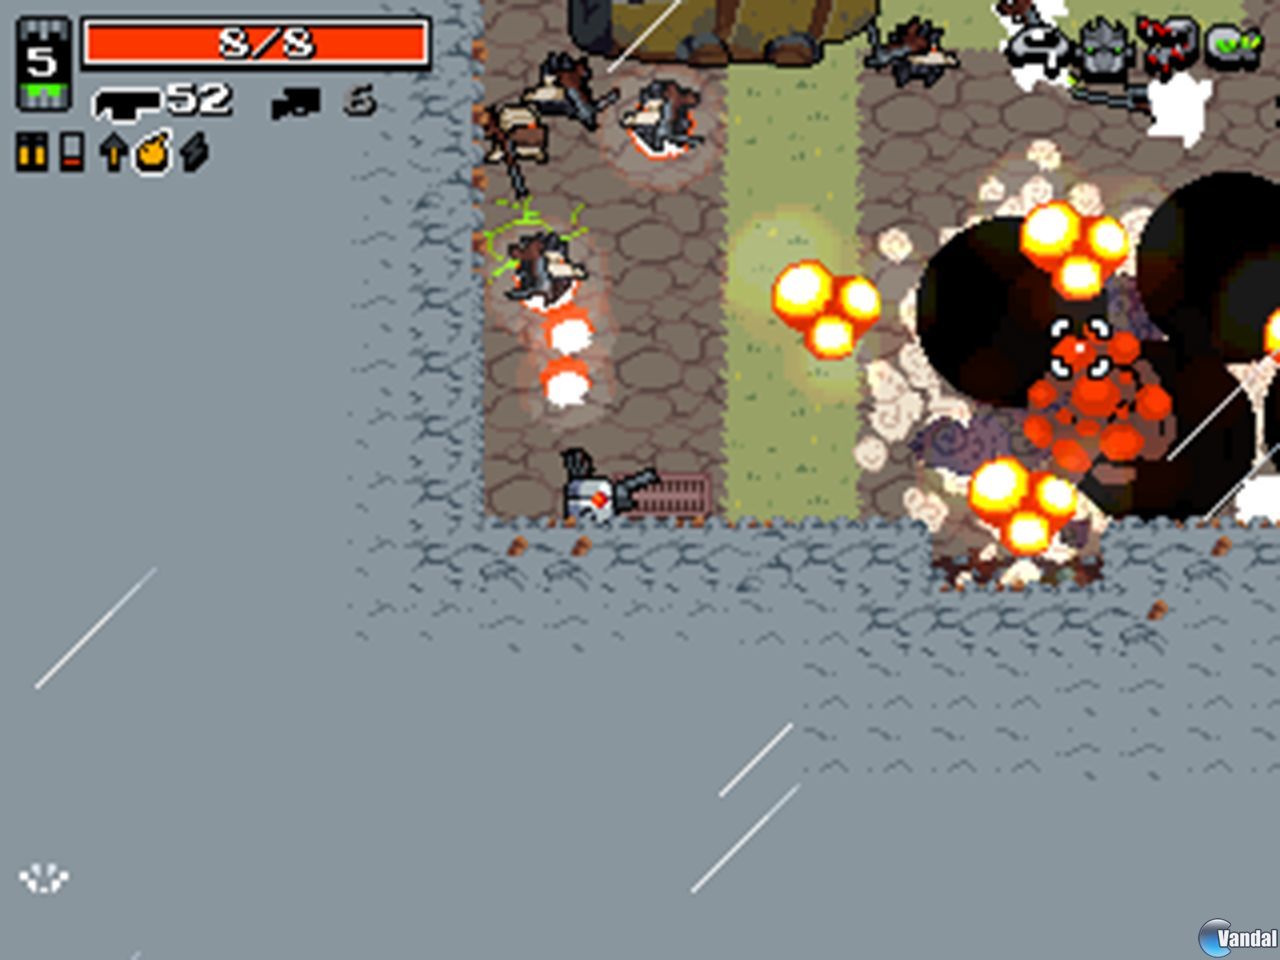 nuclear throne ps4 download